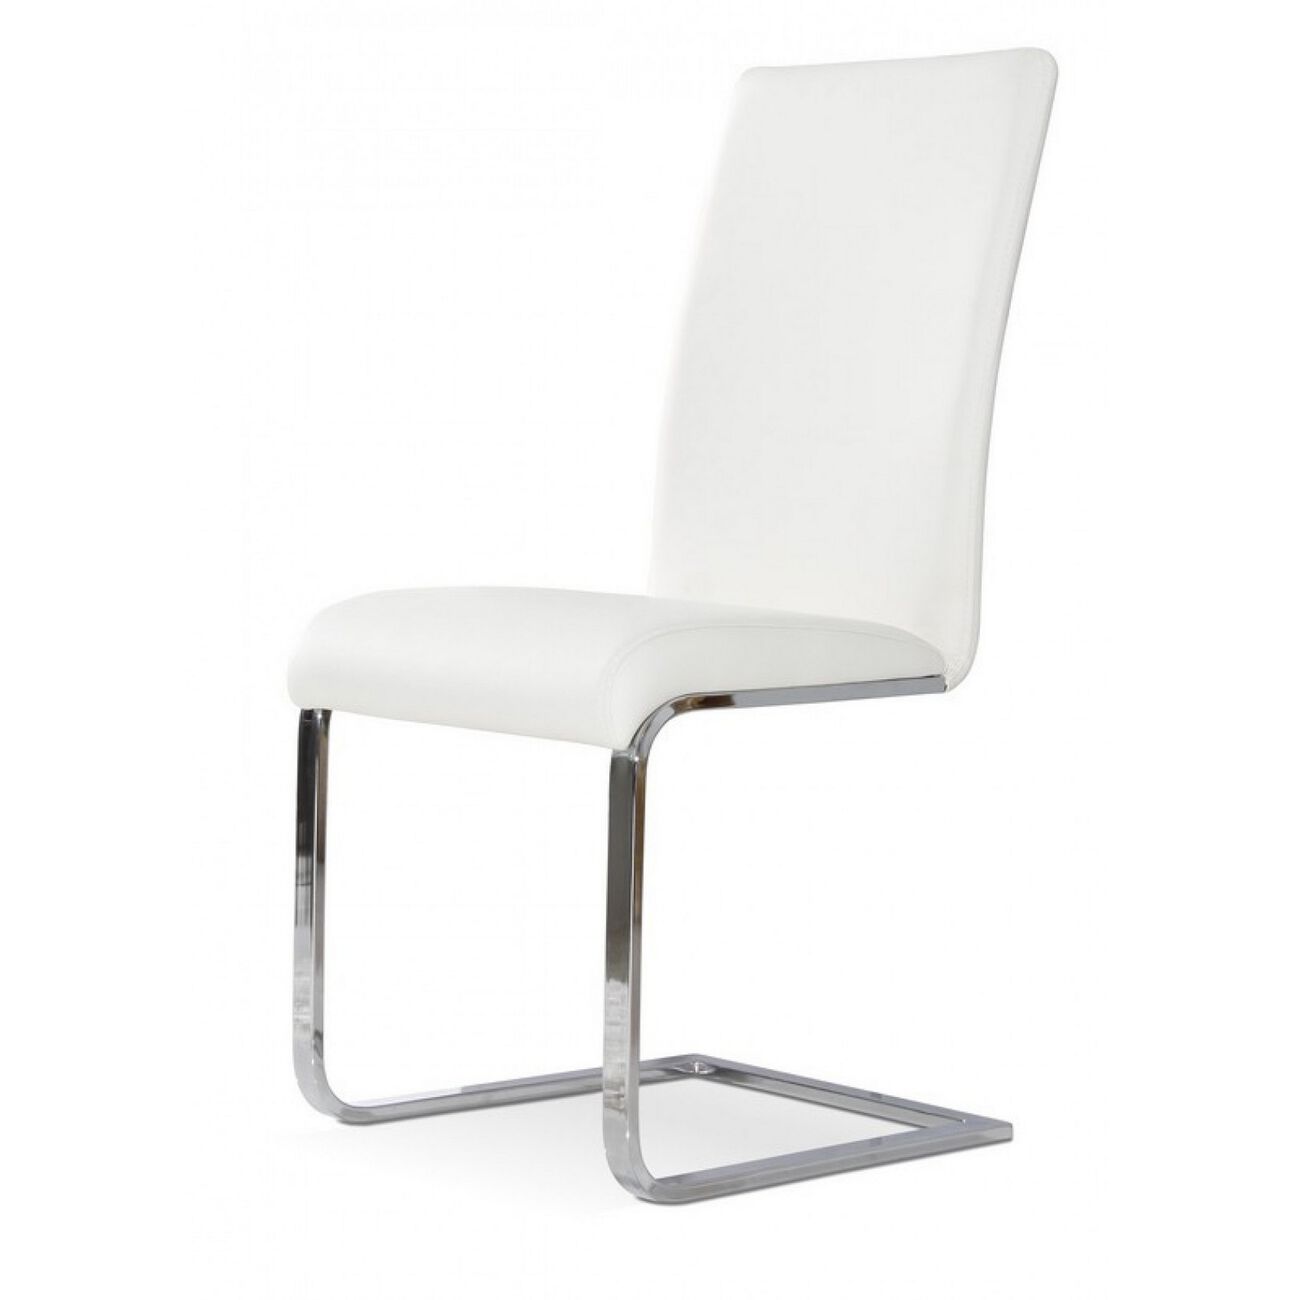 Contemporary Leatherette Dining Chair with Sled Metal Base, Set of 2, White